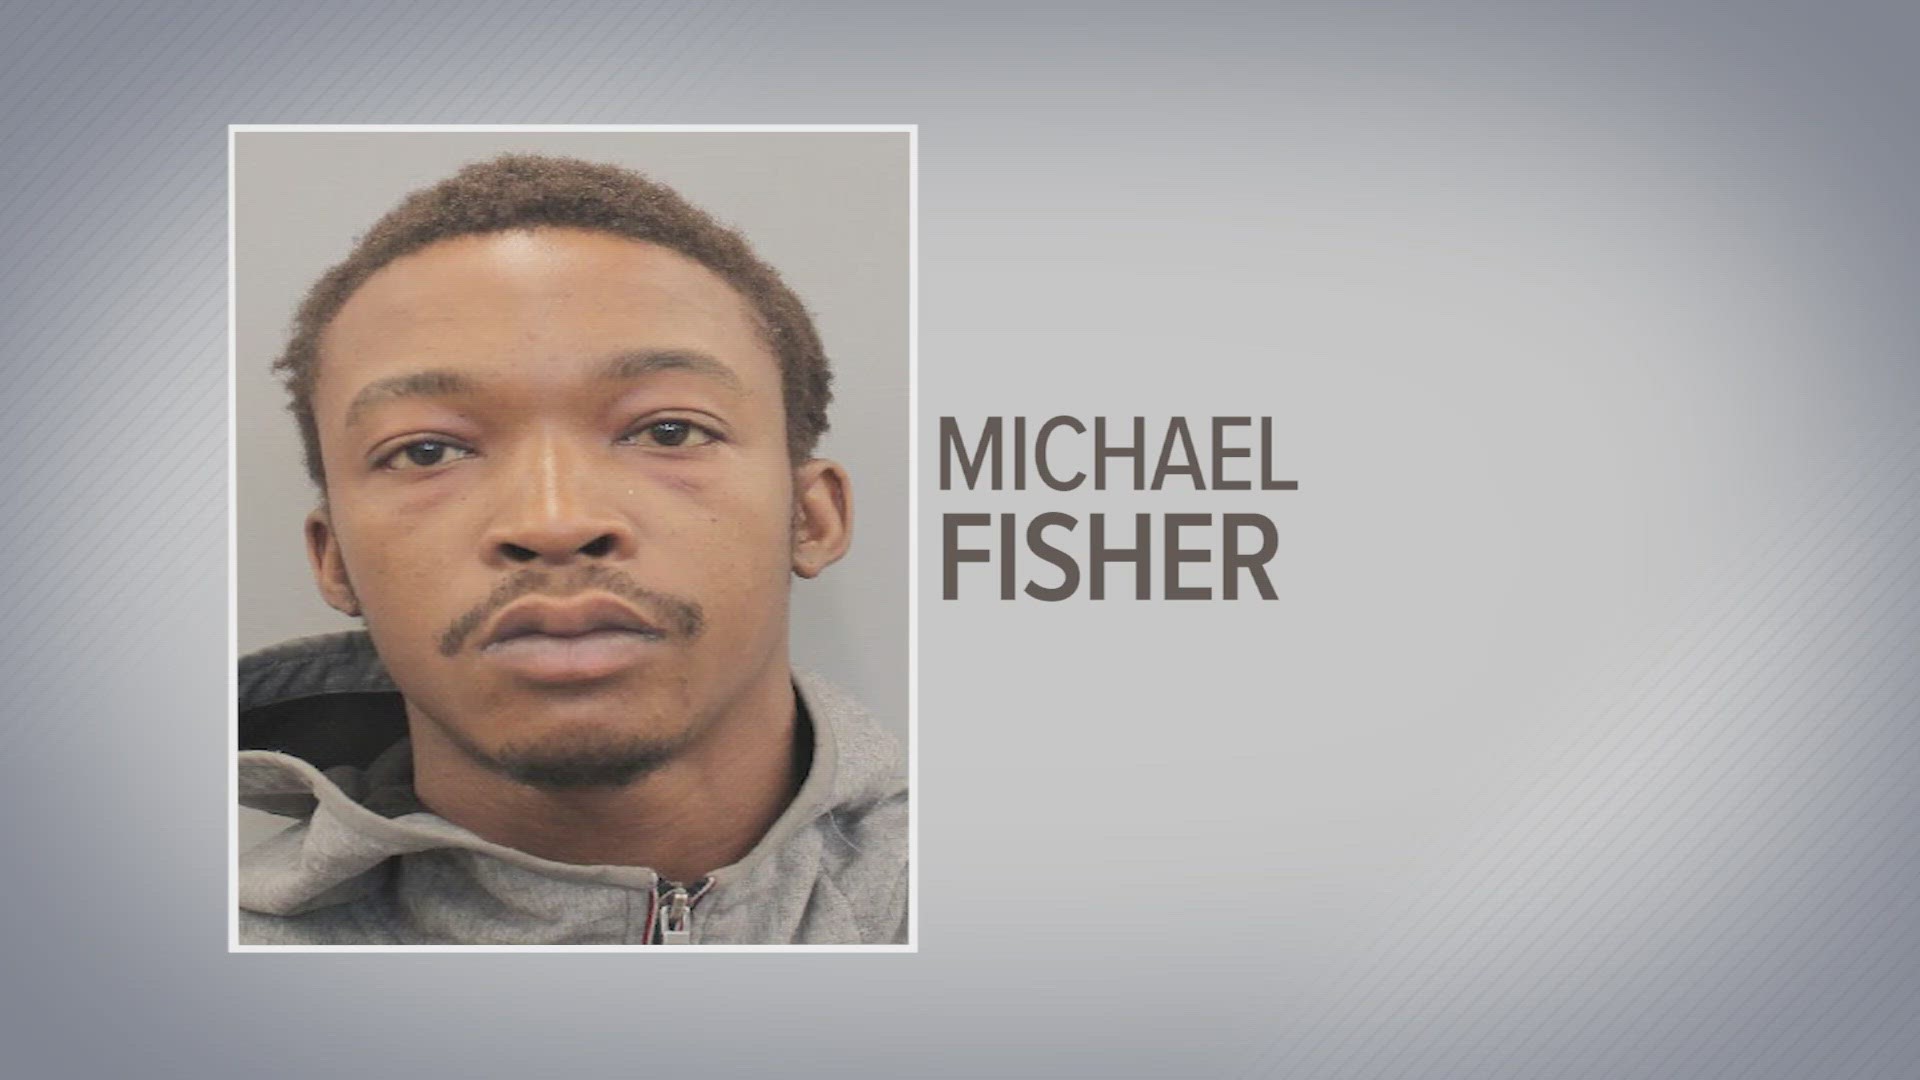 Michael Fisher is charged with injury to a child. Court records said he rushed his baby to the hospital on March 17. The 9-month-old died three days later.